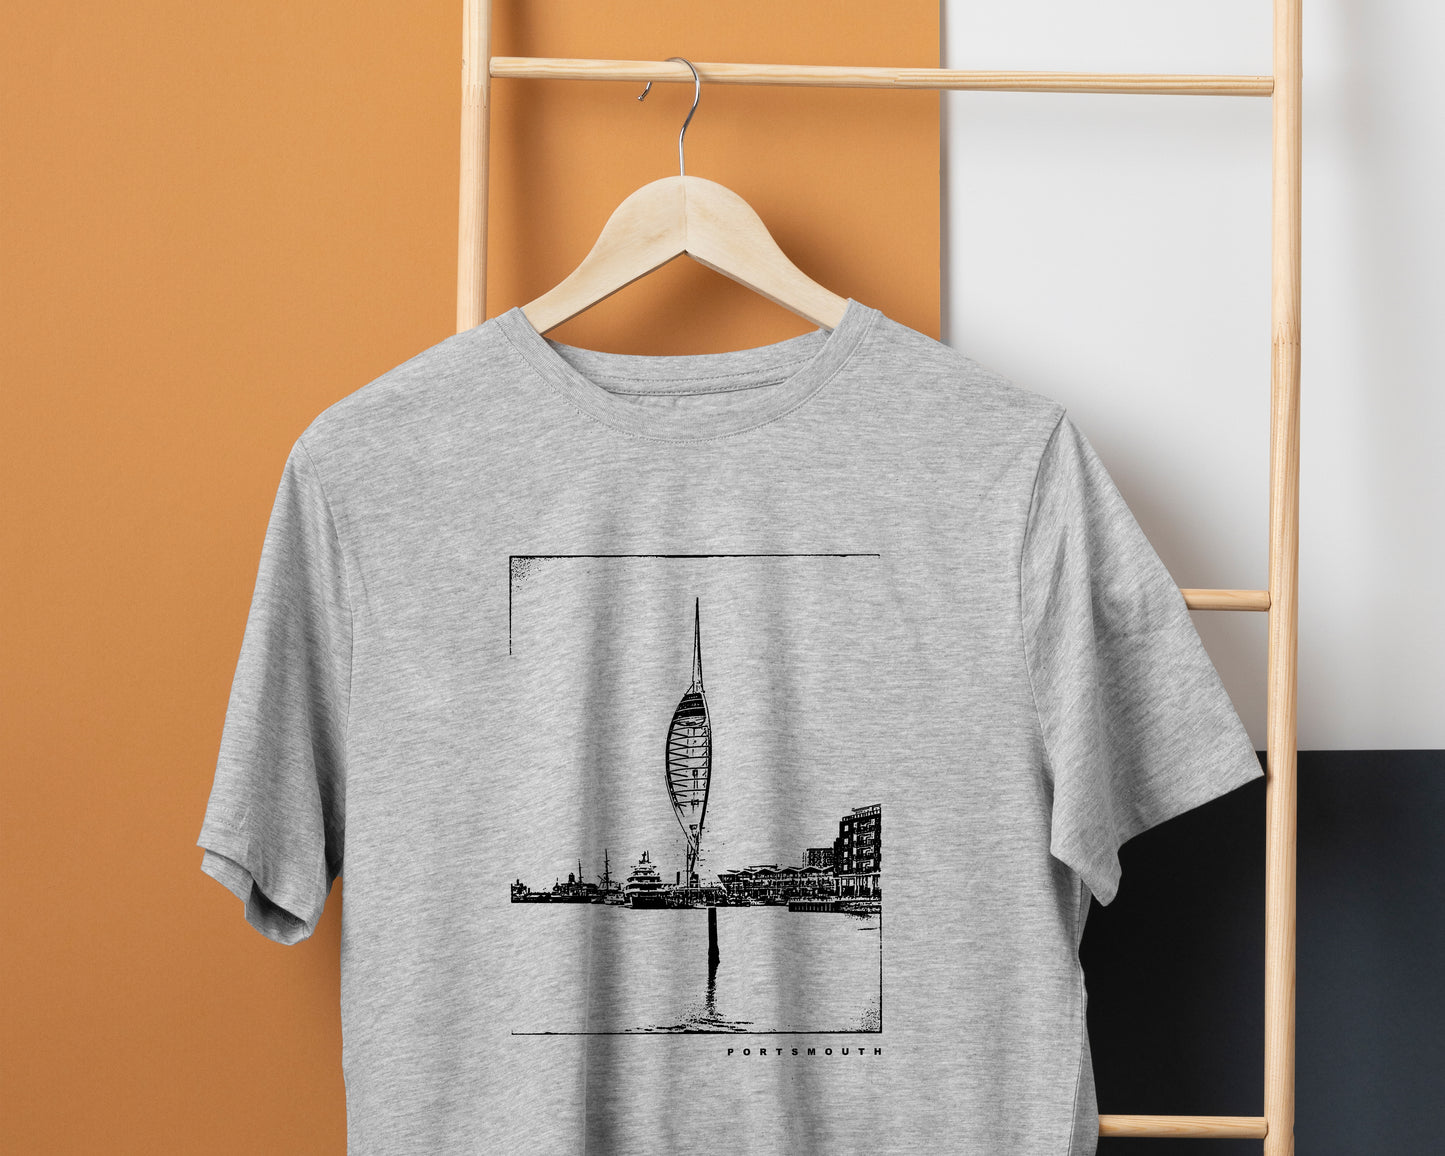 Portsmouth Sketch Tee - Available on White/Grey/Black T-Shirts